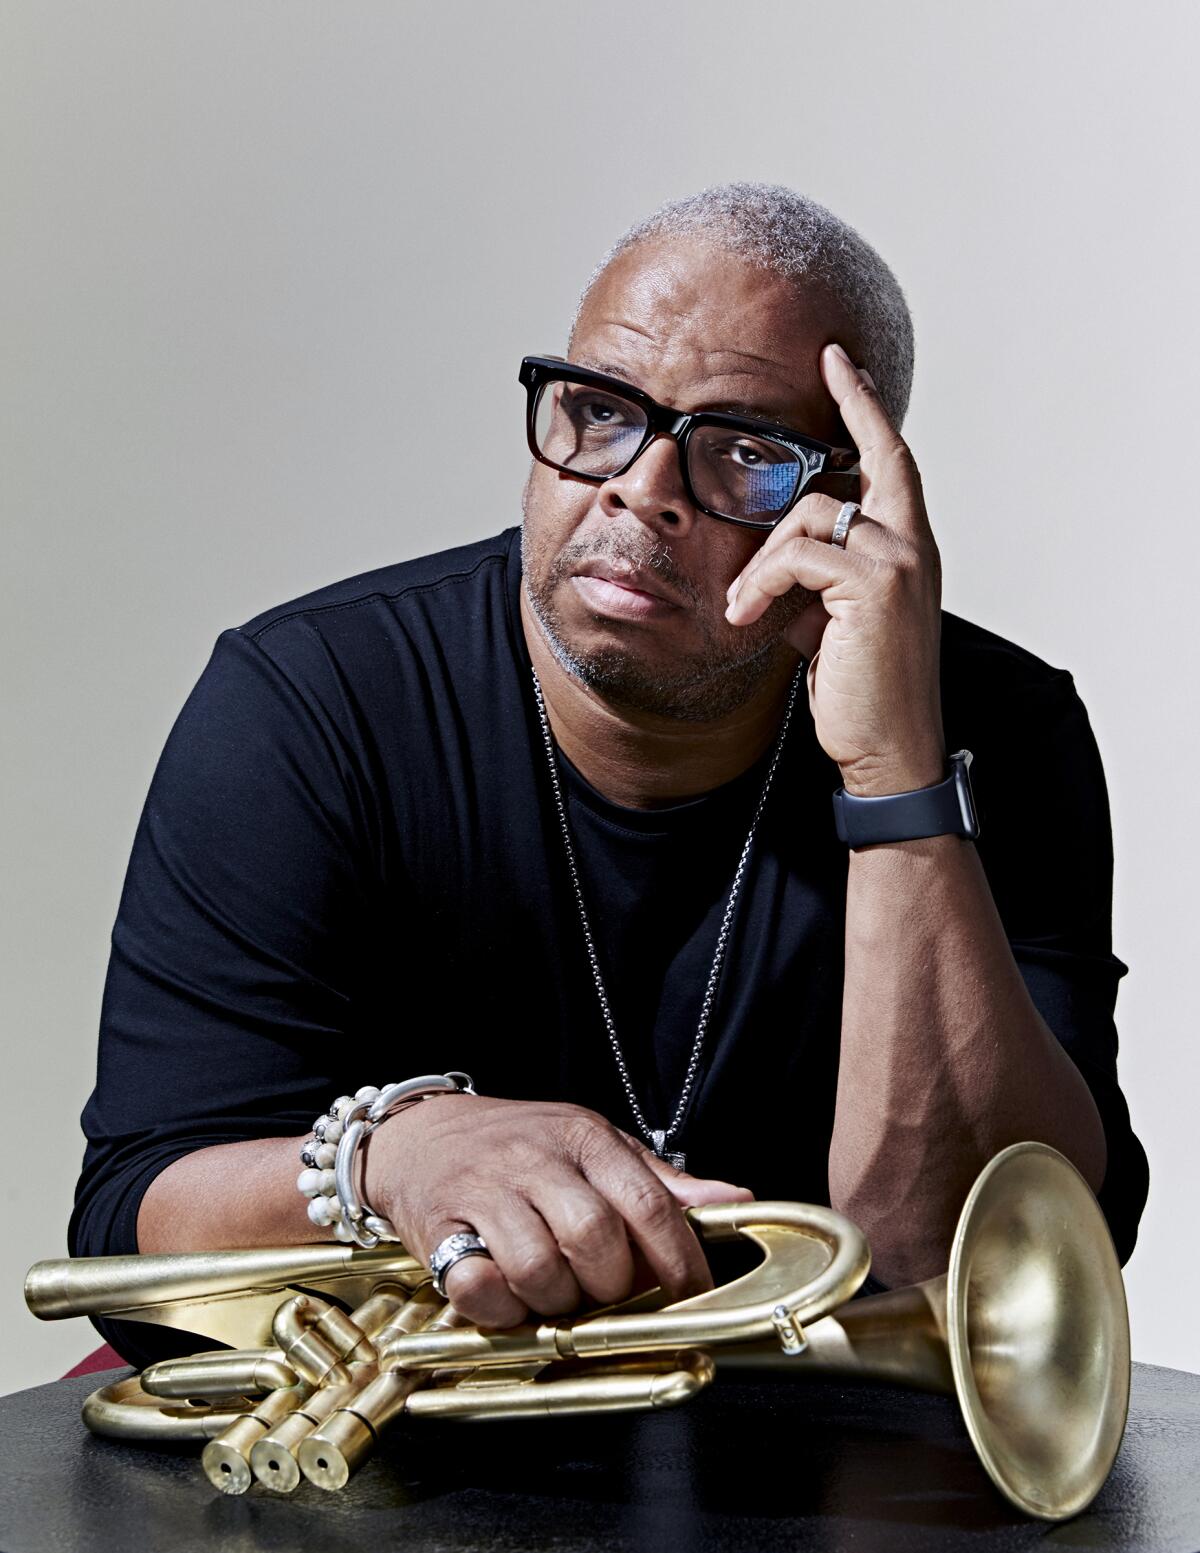 Jazz trumpeter and two-time Oscar nominated film composer Terence Blanchard will perform music from his album.